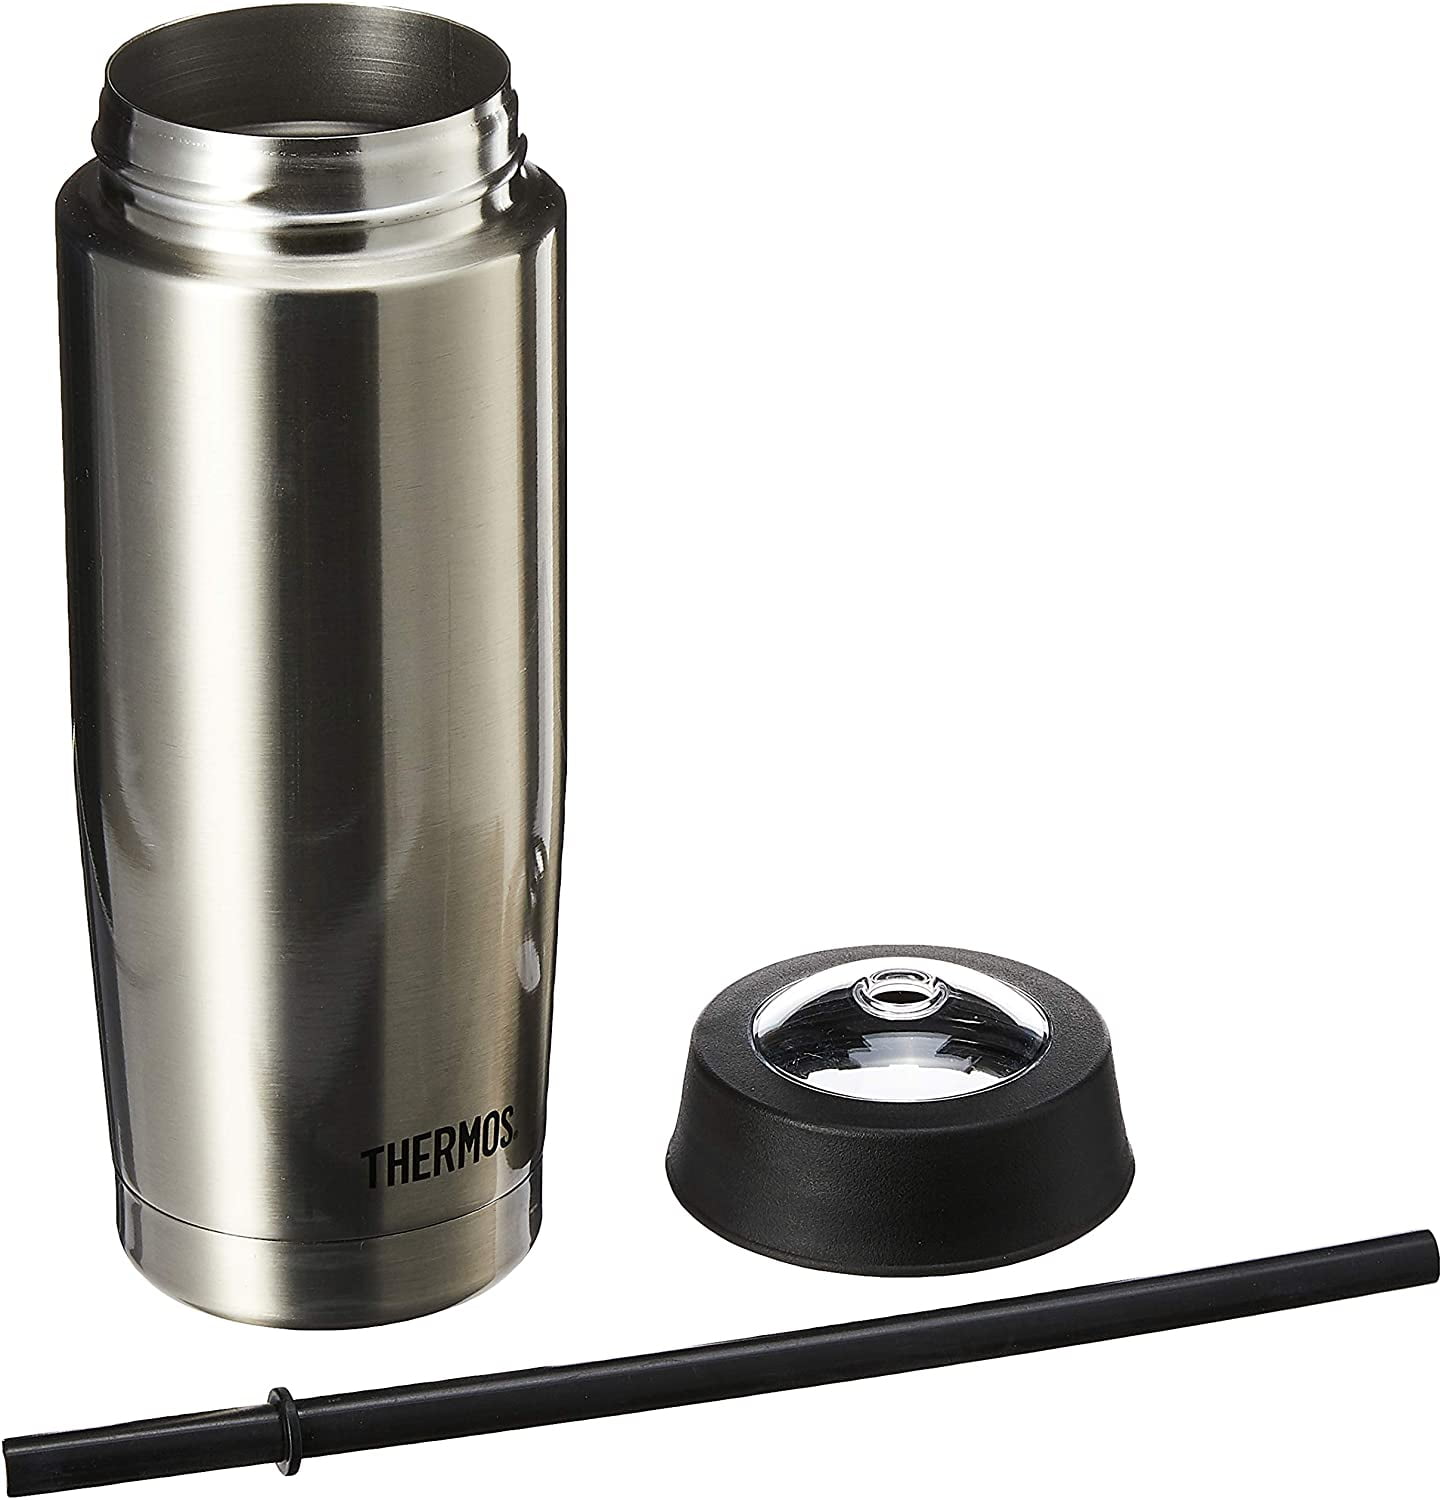 Greensen Travel , Stainless Steel Vacuum Insulated , for Travel Camping,Thermos Mug, Silver